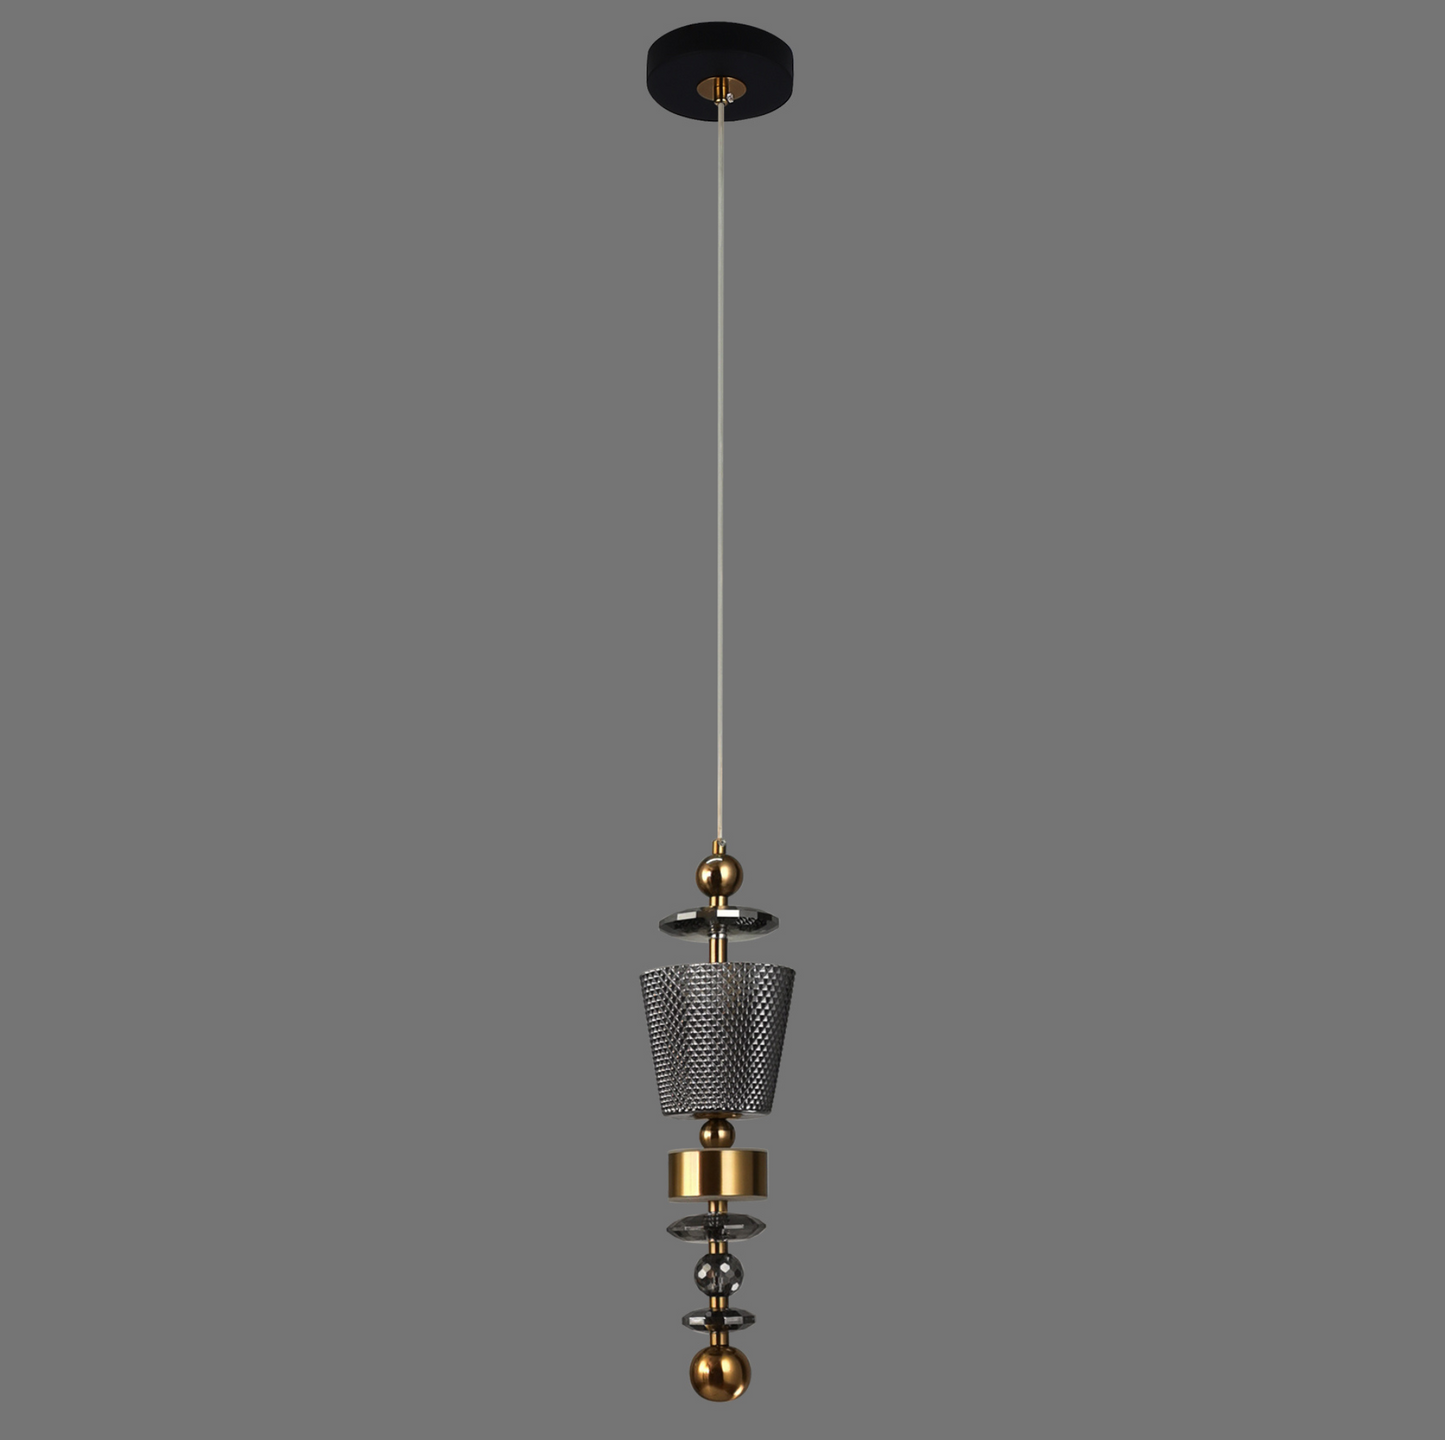 Modern Crystal Glass Smoked Ash LED Pendent Light by Gloss (A1932/1/A3)